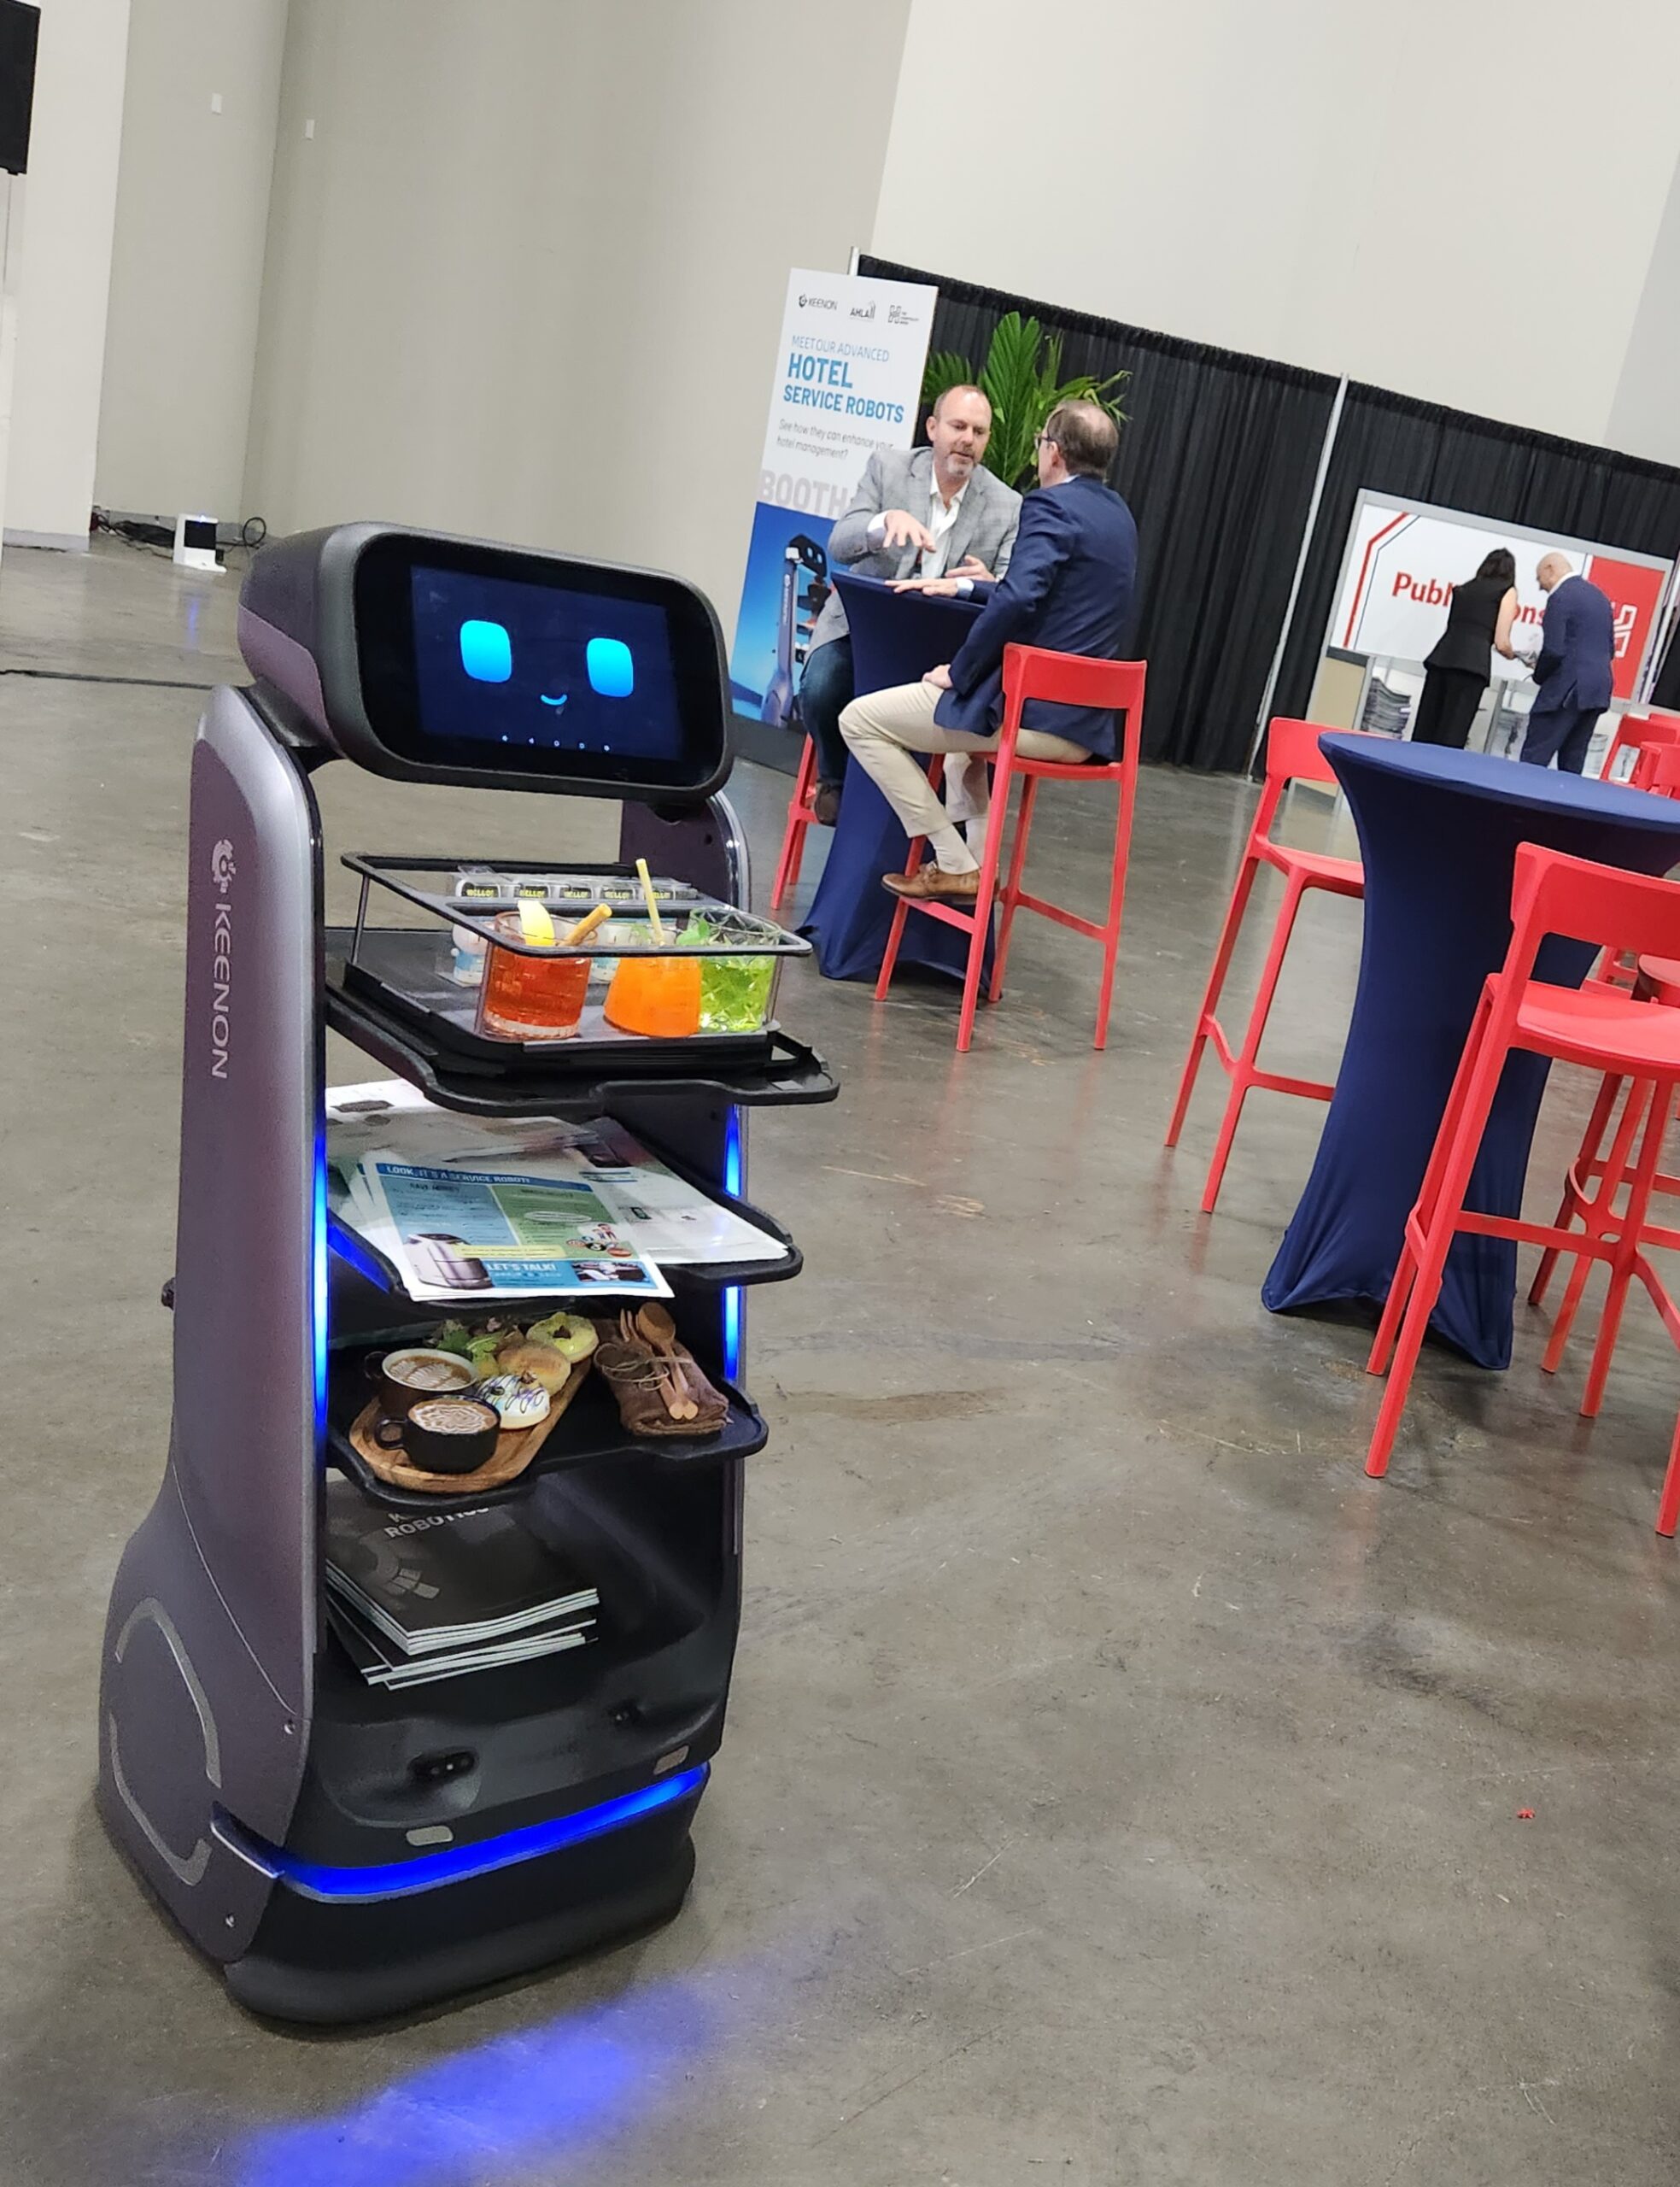 A robot serves attendees at The Hospitality Show in Las Vegas, NV.